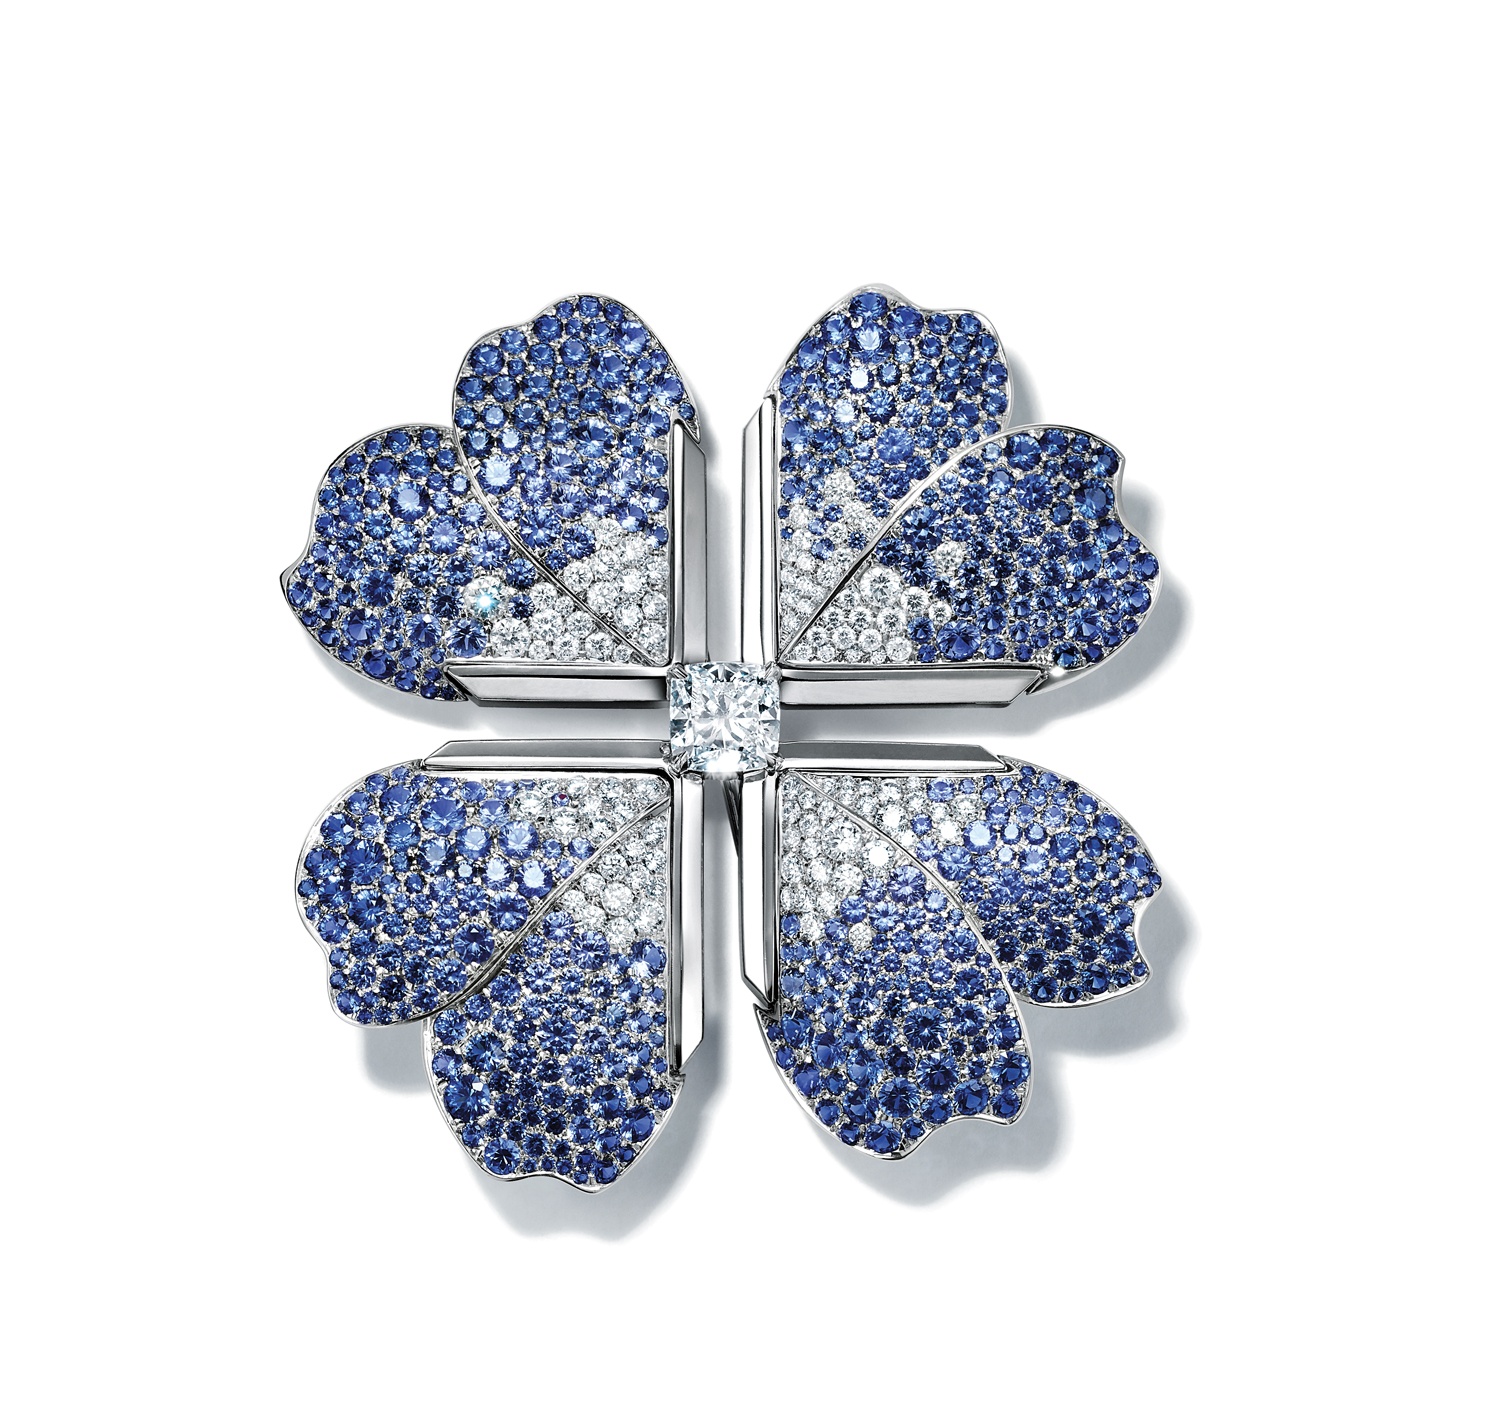 Tiffany & Co.’s Exquisite Blue Book Collection Features One-of-a-Kind ...